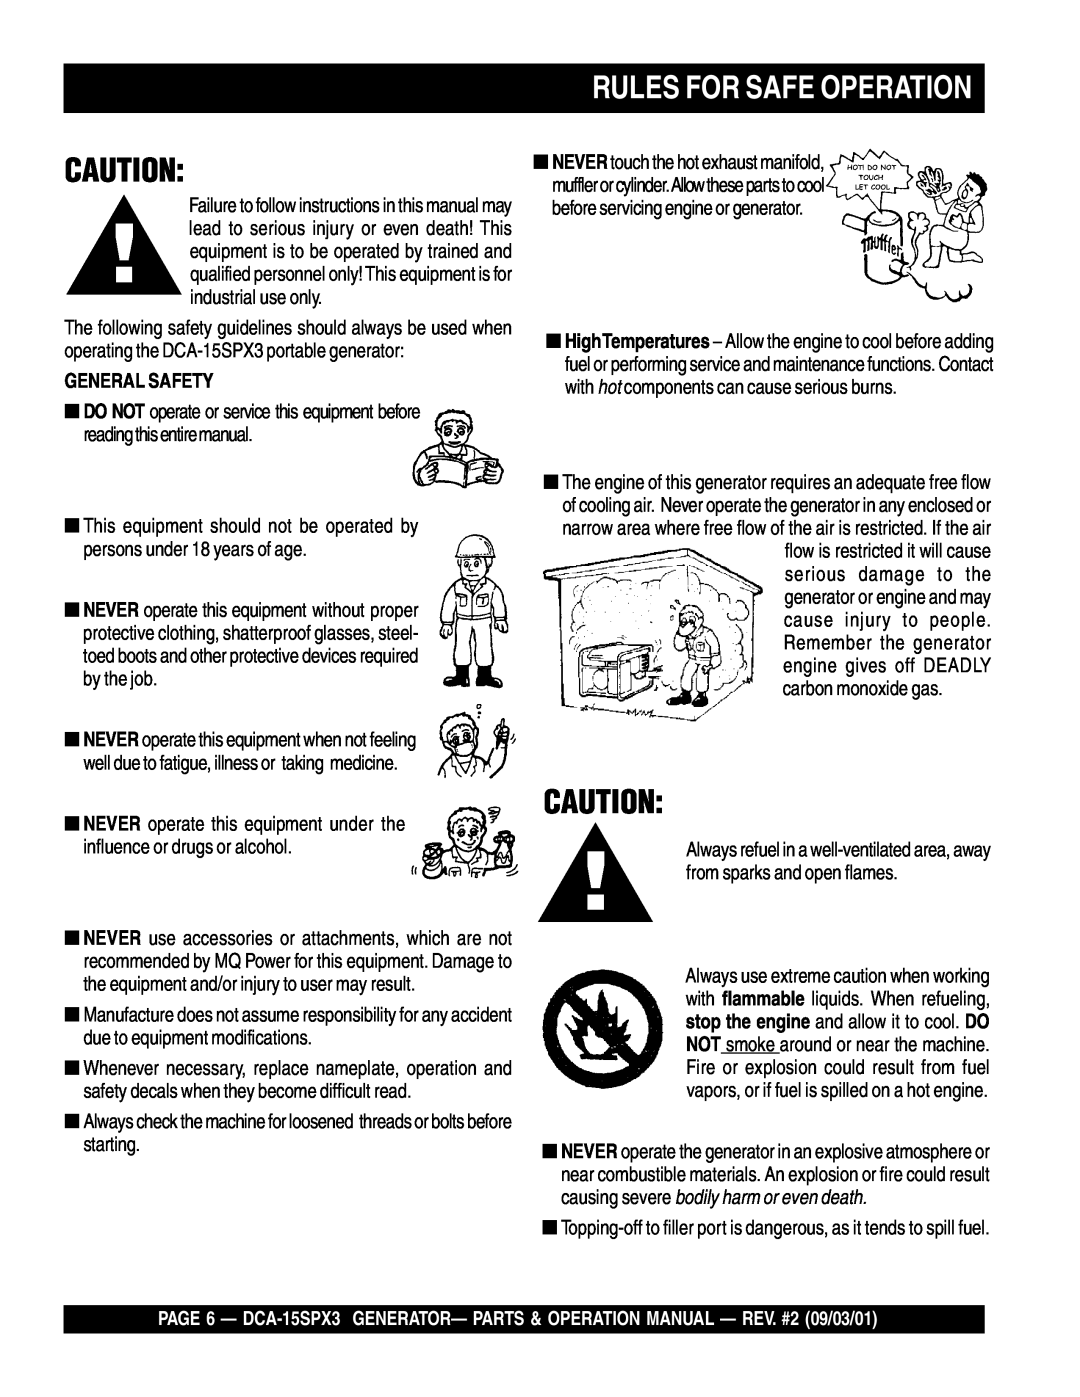 Multiquip DCA-15SPX3 operation manual Rules For Safe Operation, General Safety 